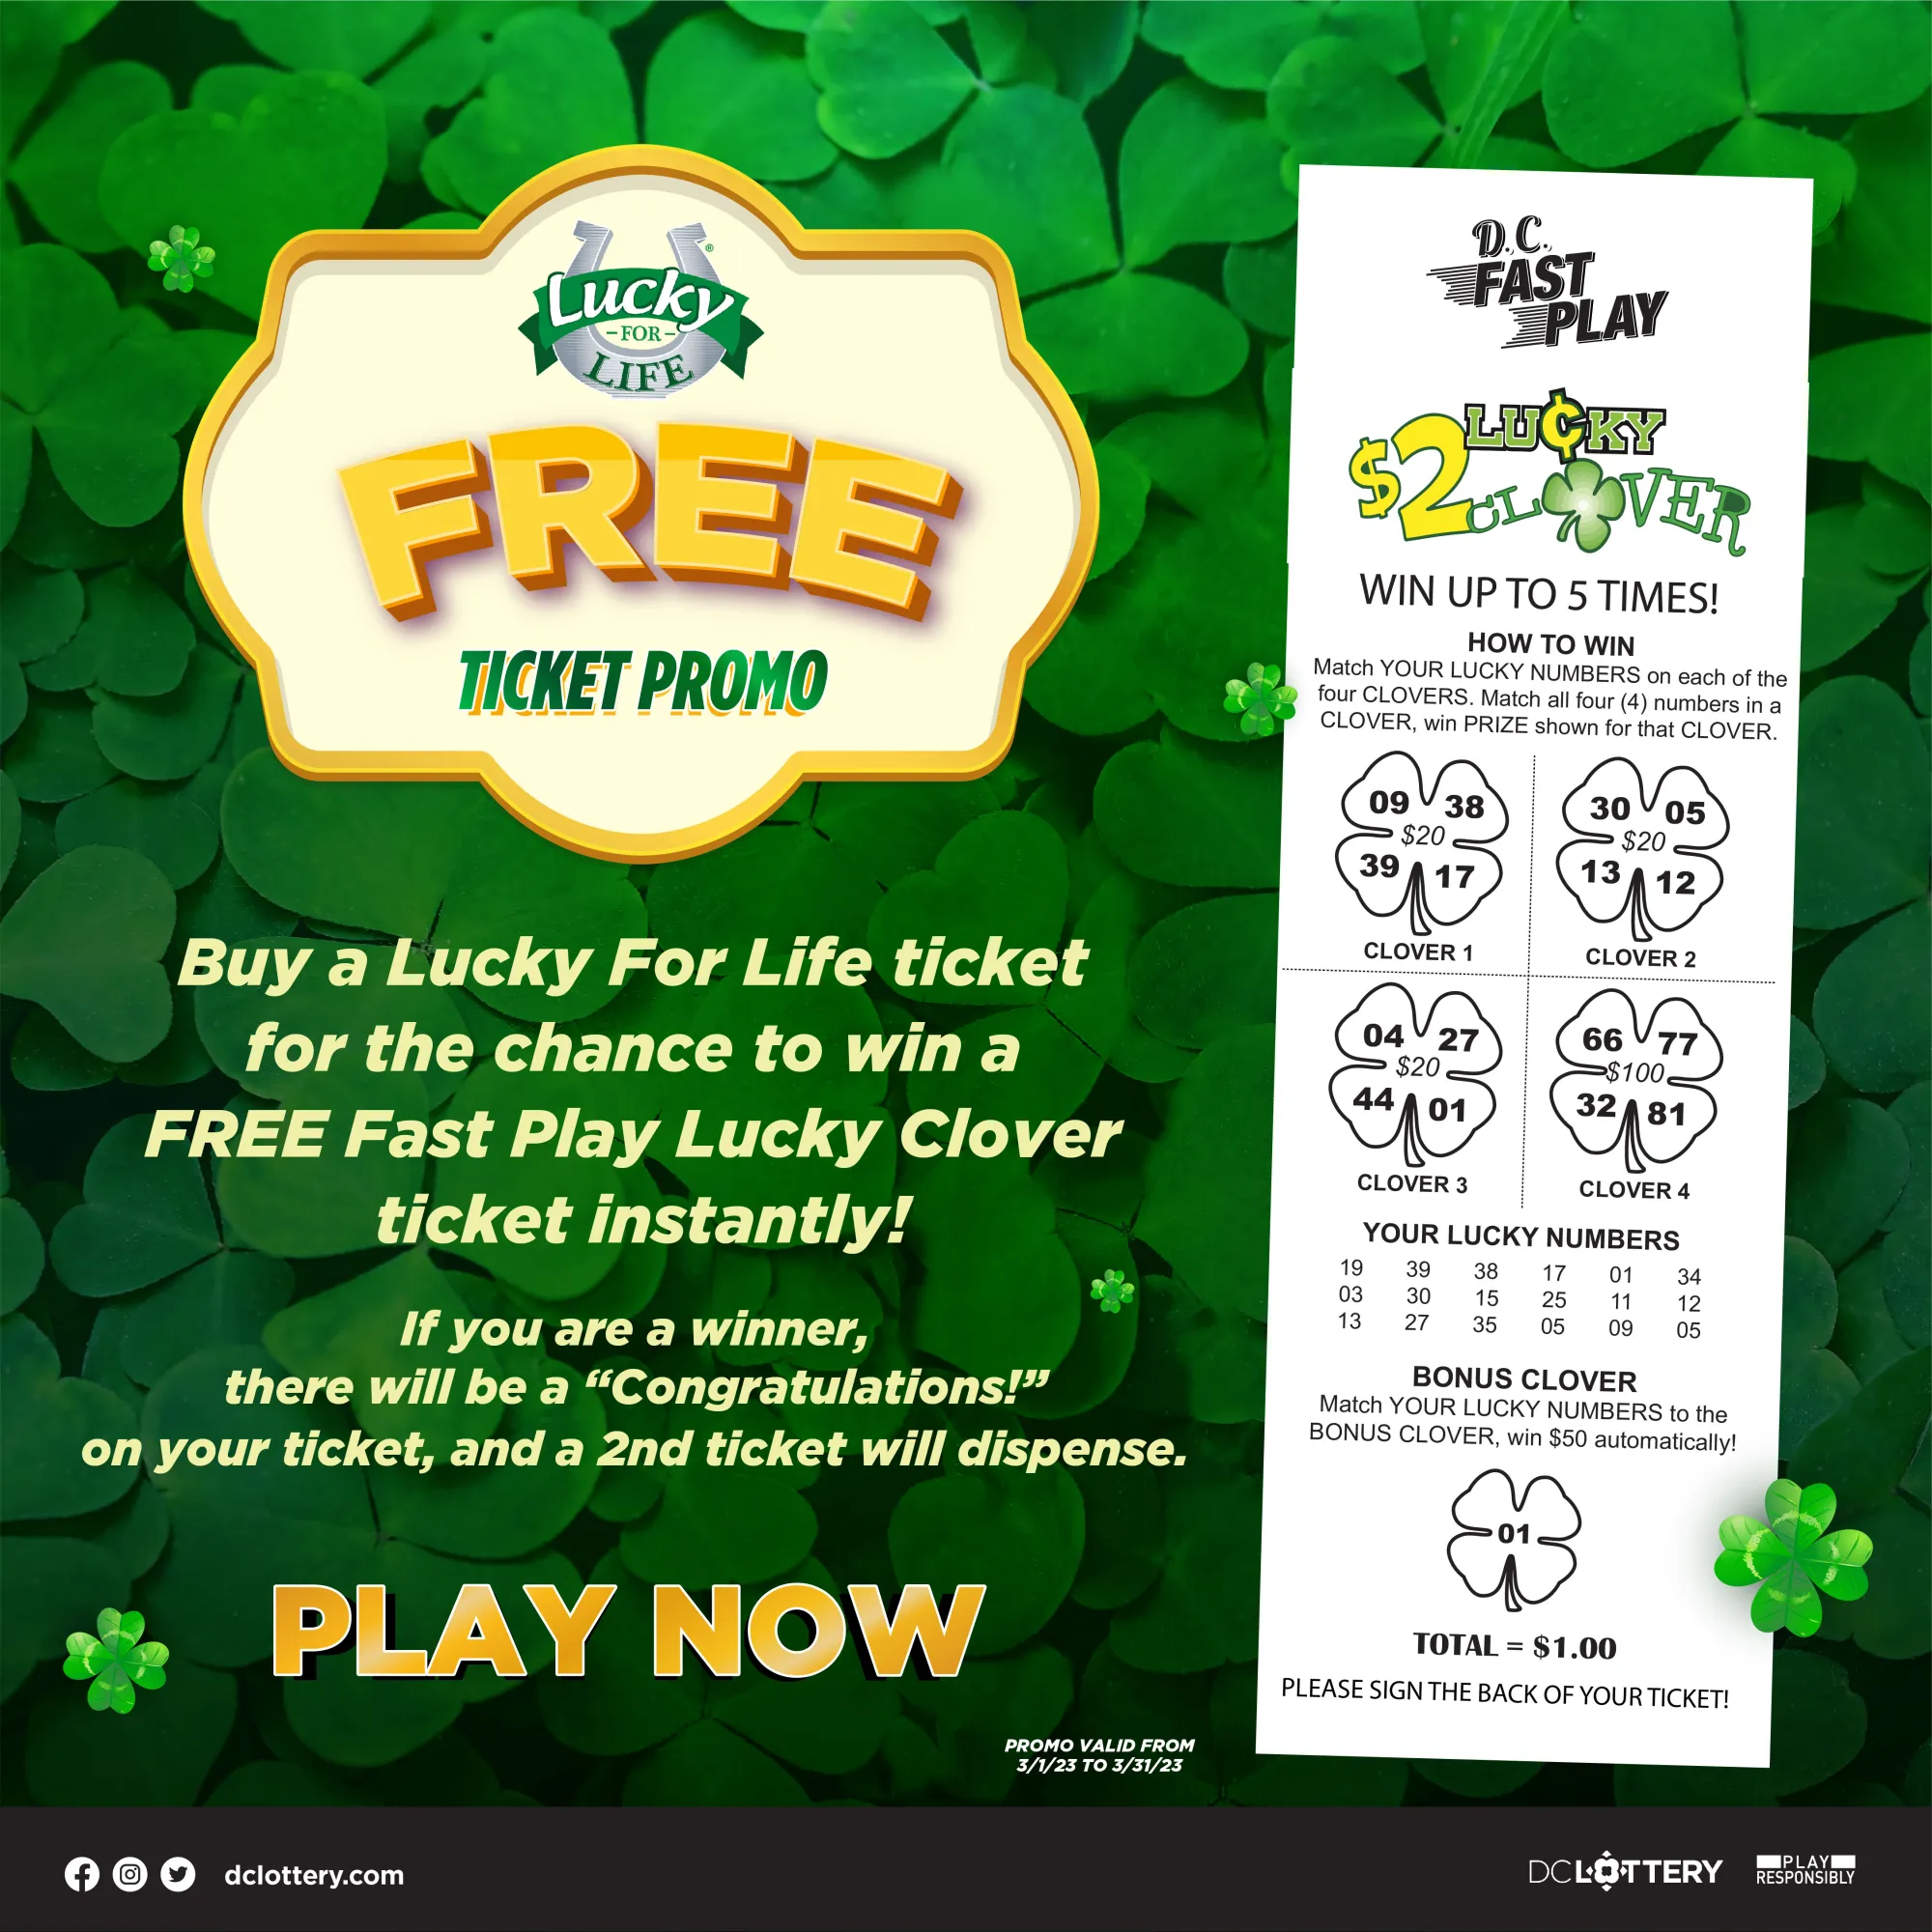 Lucky for Life Free Ticket Promotion